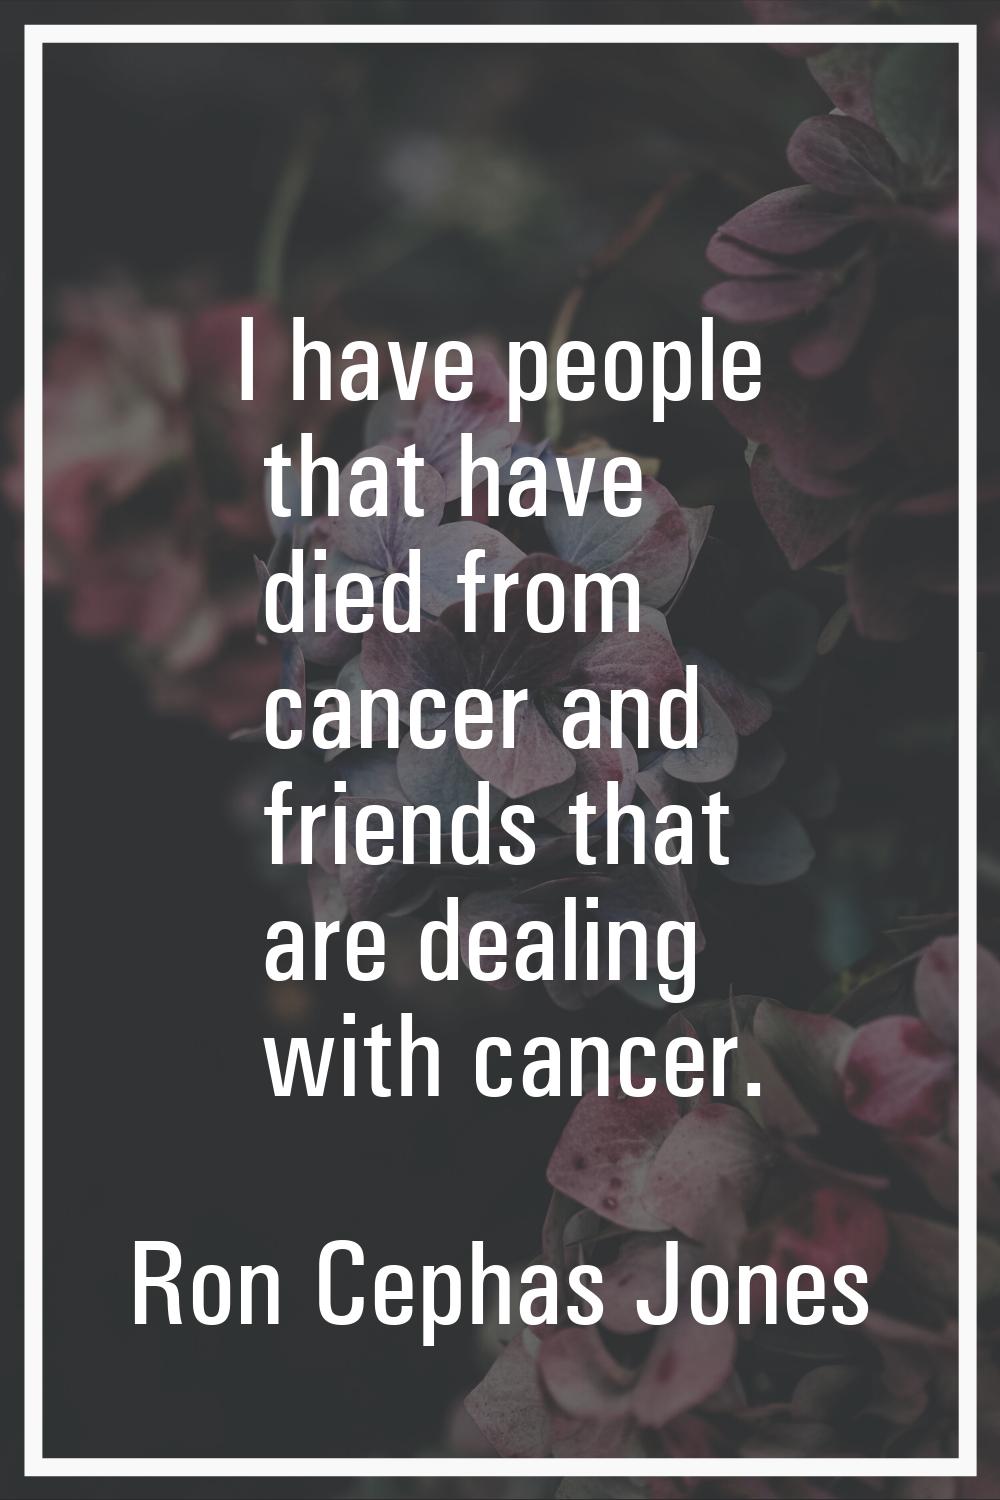 I have people that have died from cancer and friends that are dealing with cancer.